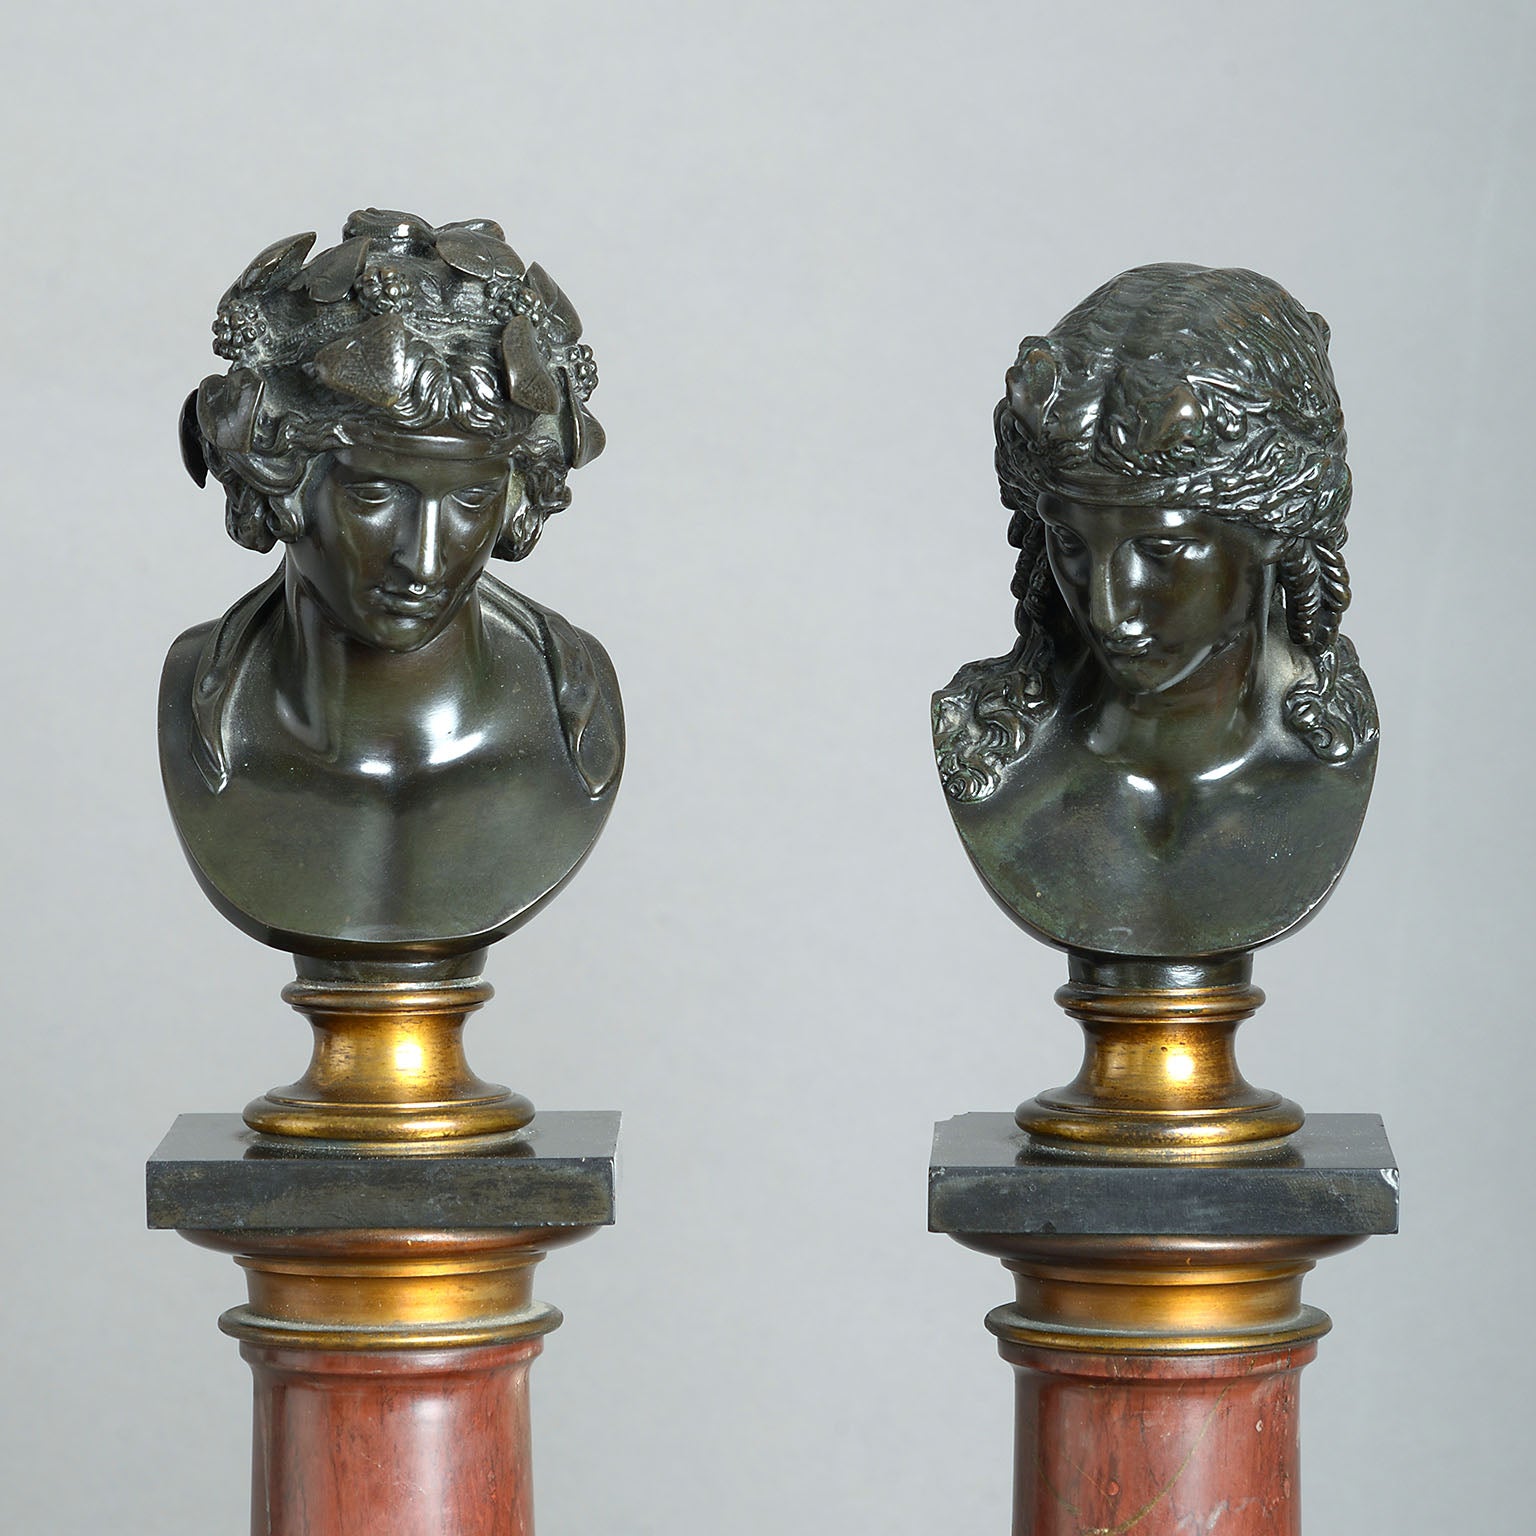 Pair of Grand Tour Busts on Marble Columns